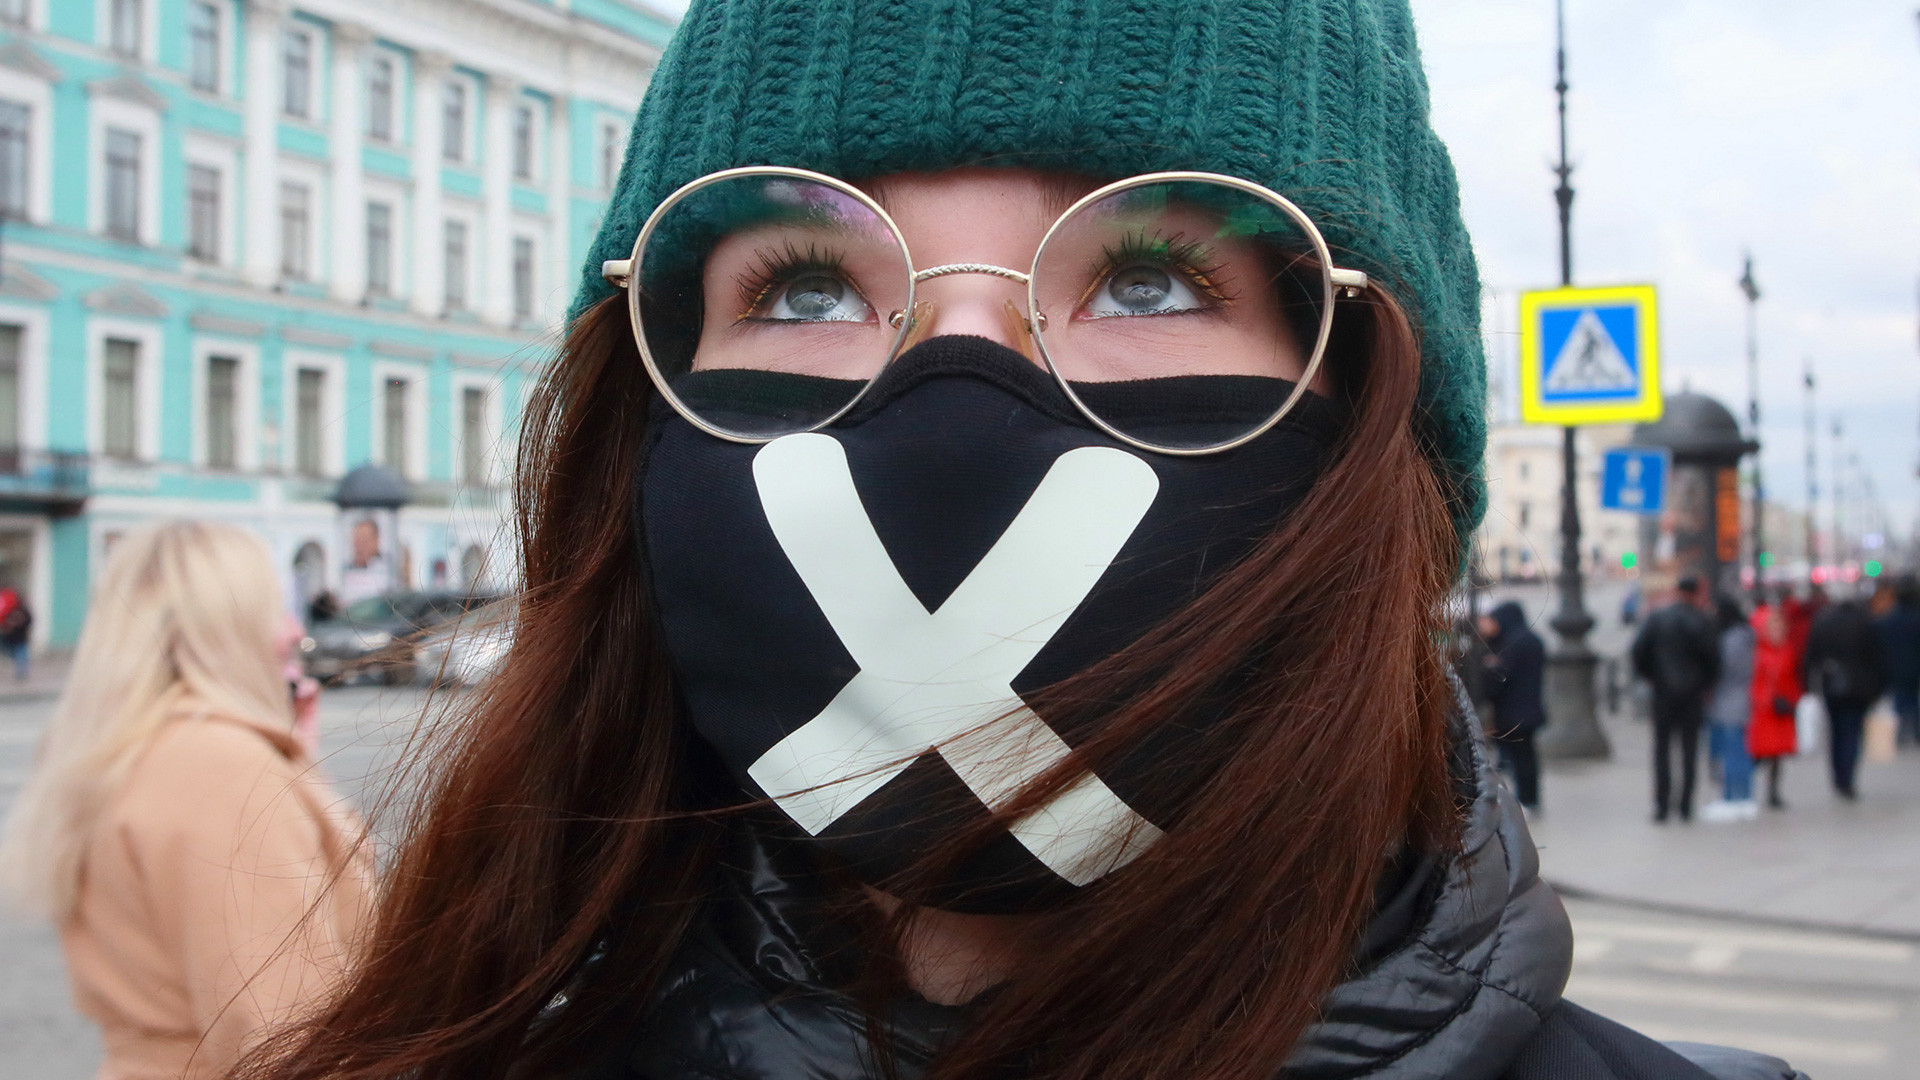 A girl wearing a mask in St. Petersburg.